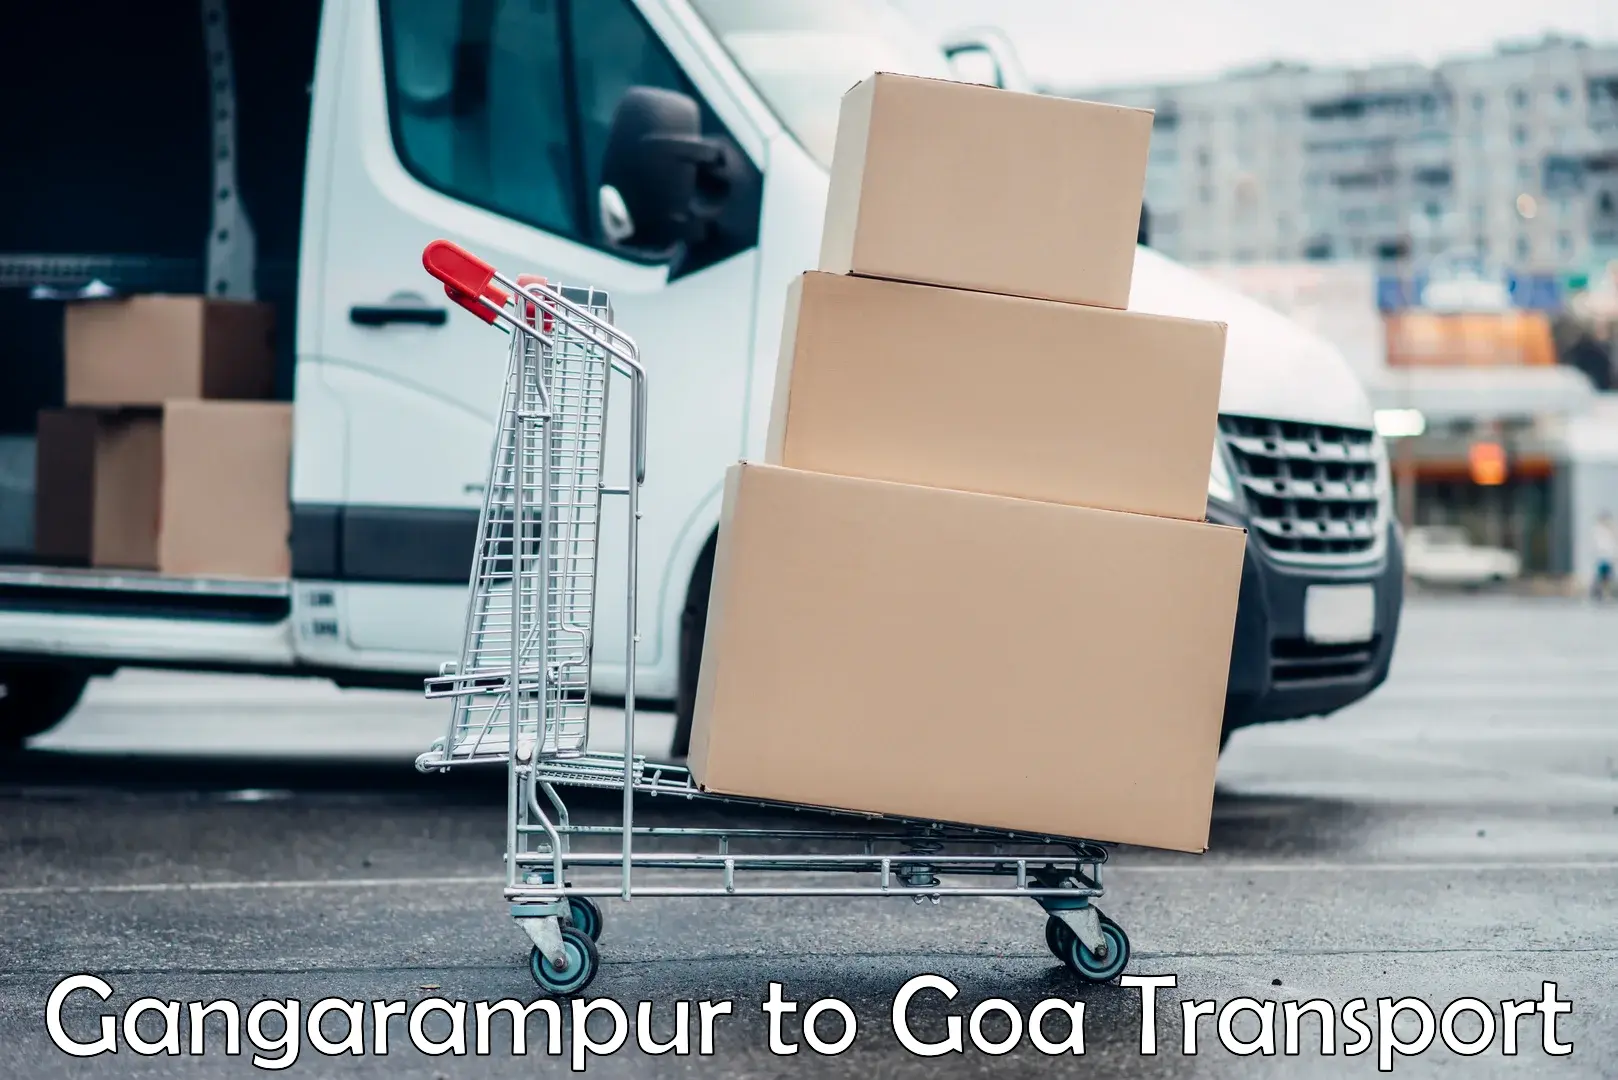 Goods delivery service Gangarampur to Goa